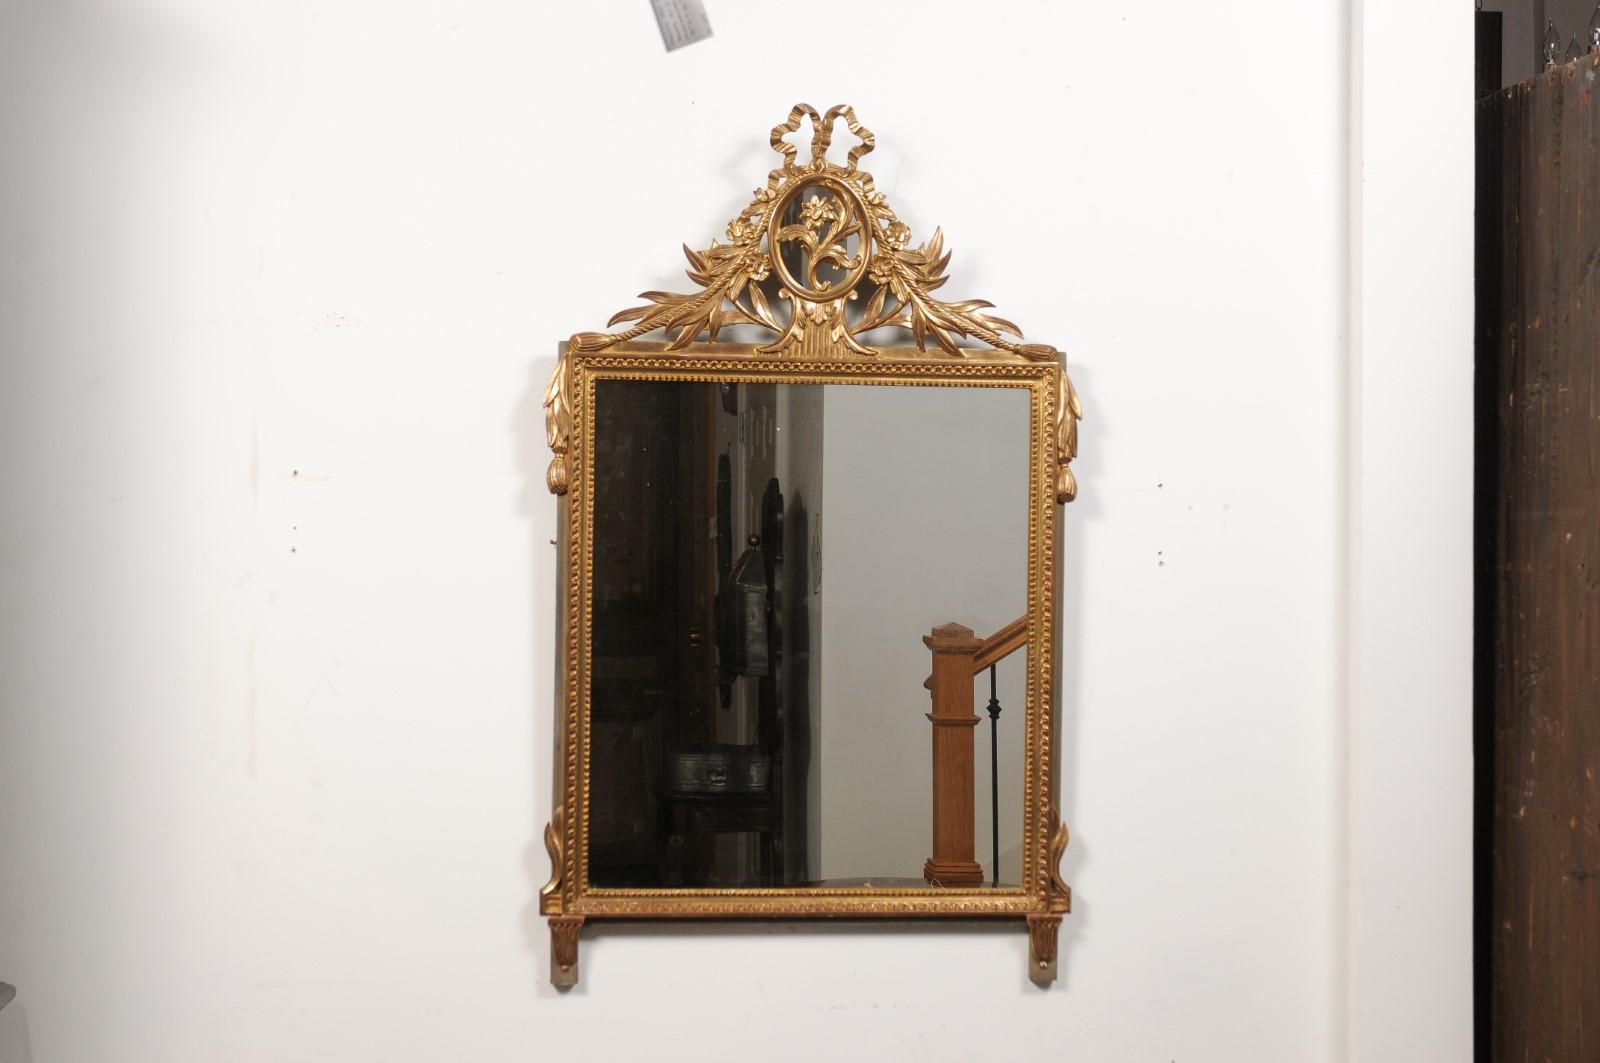 20th Century Louis XVI Style Gilt Wood Mirror with Floral Carved Medallion Crest and Tassels For Sale